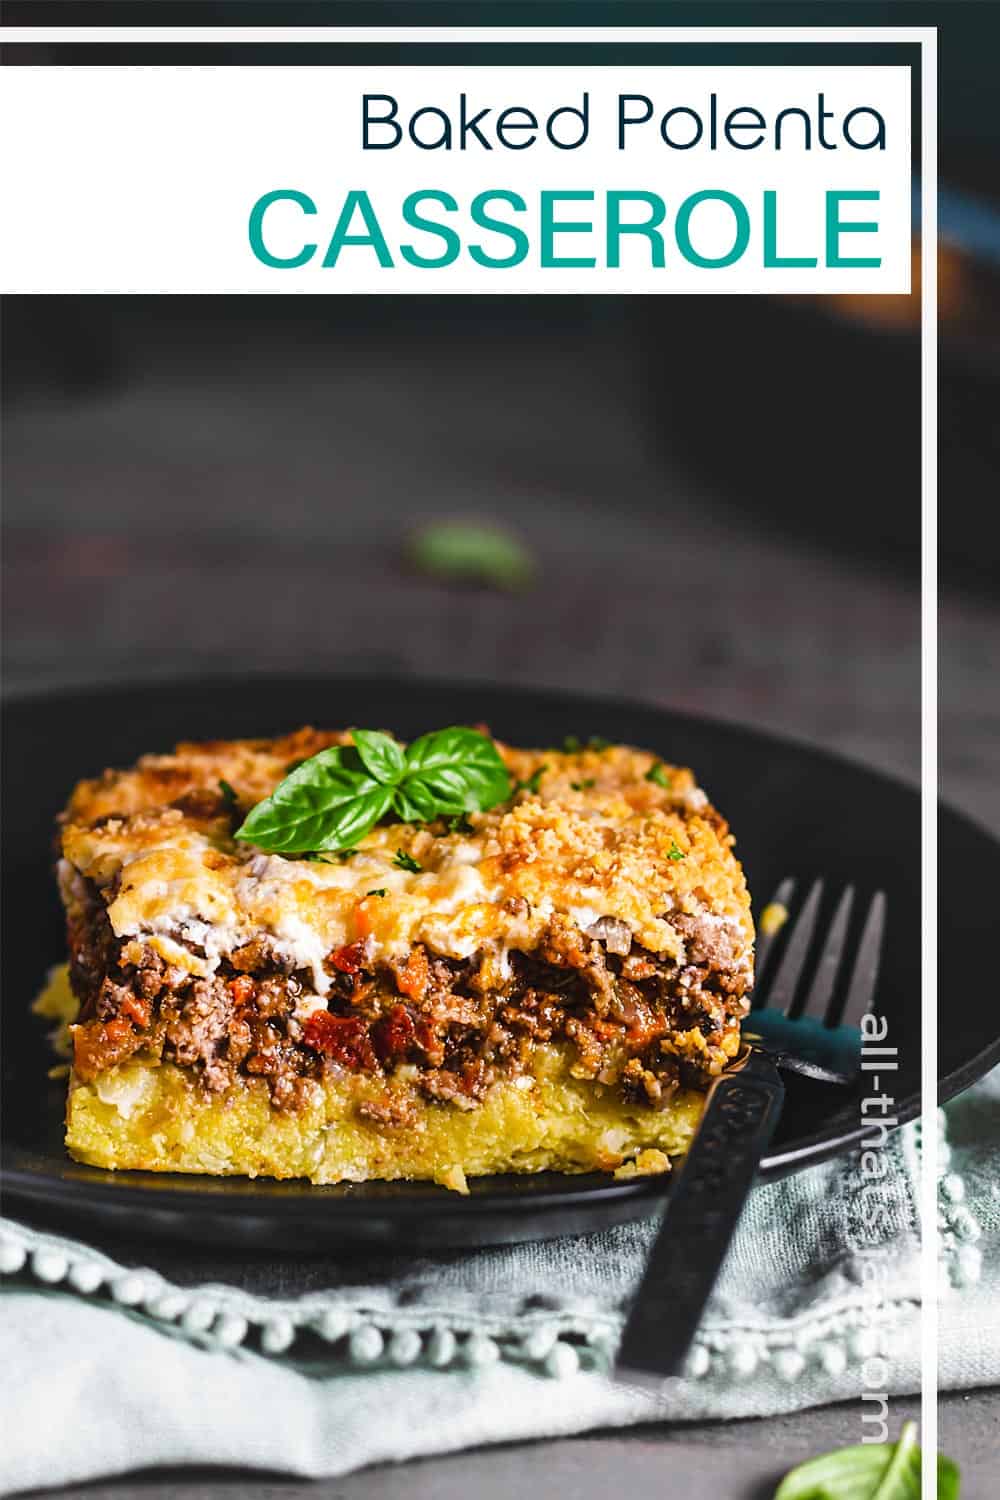 A serving of beef and polenta casserole with text overlay.